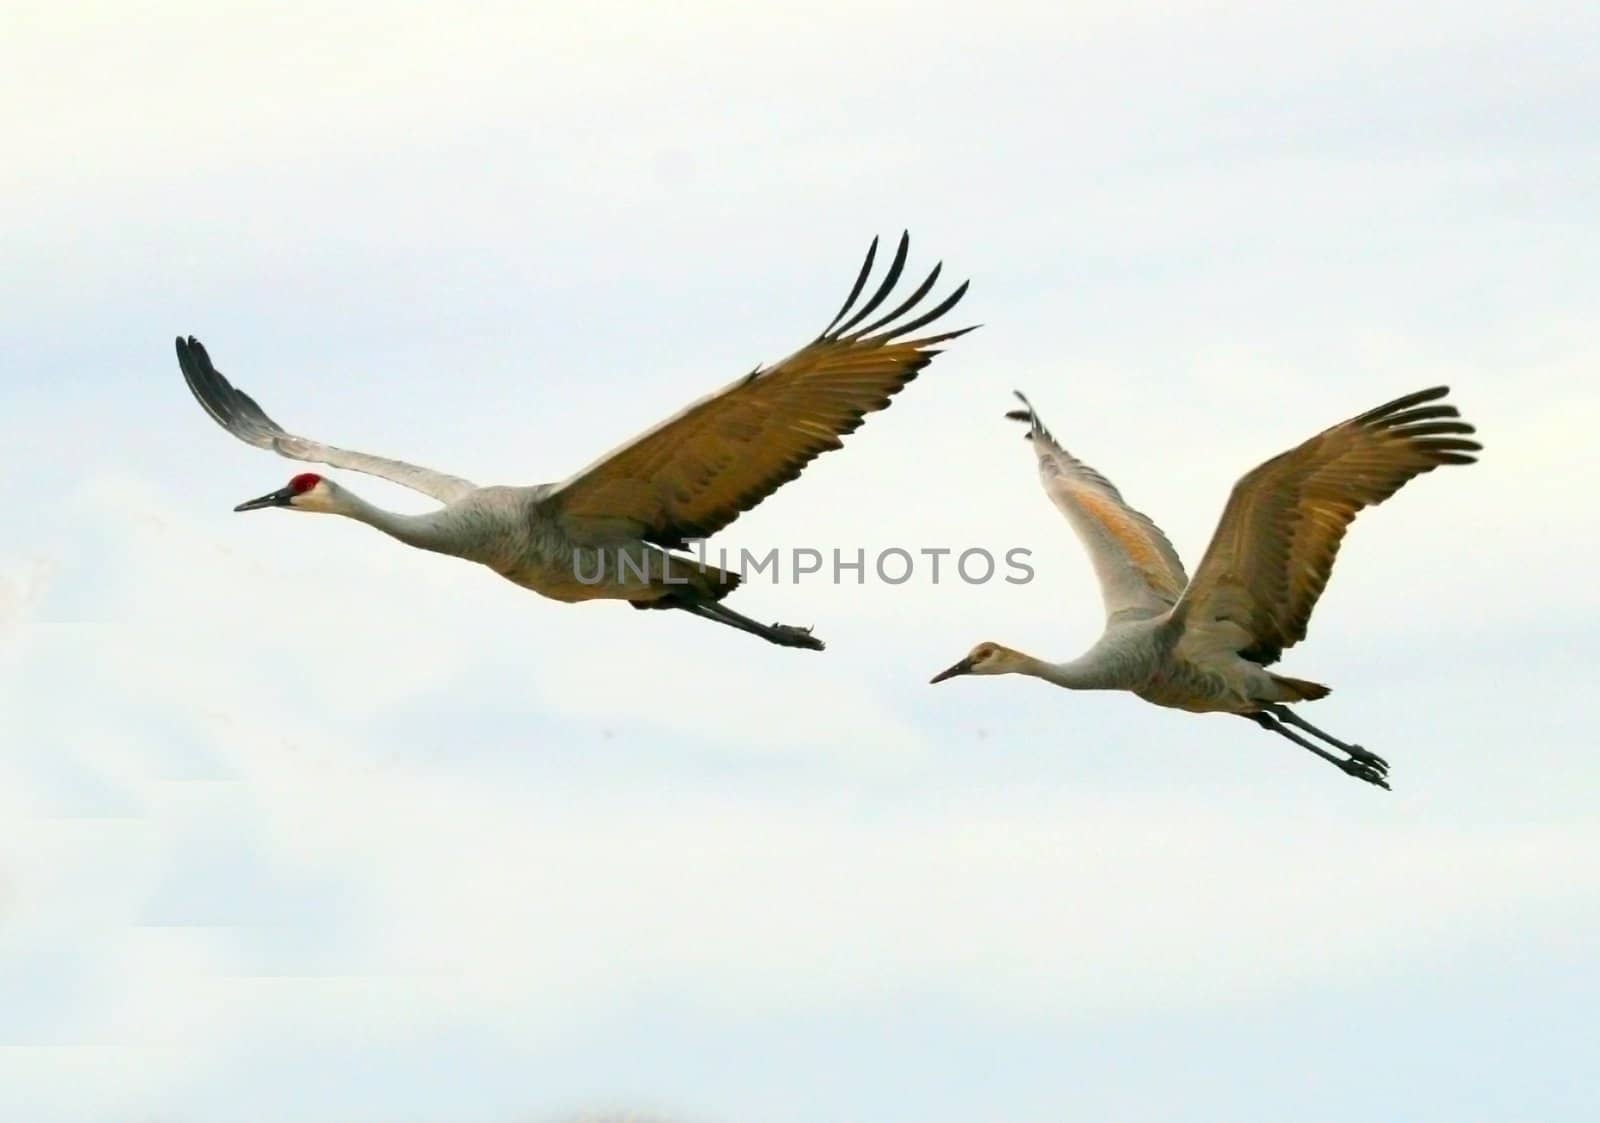 Sandhill Cranes Flying by Auldwhispers